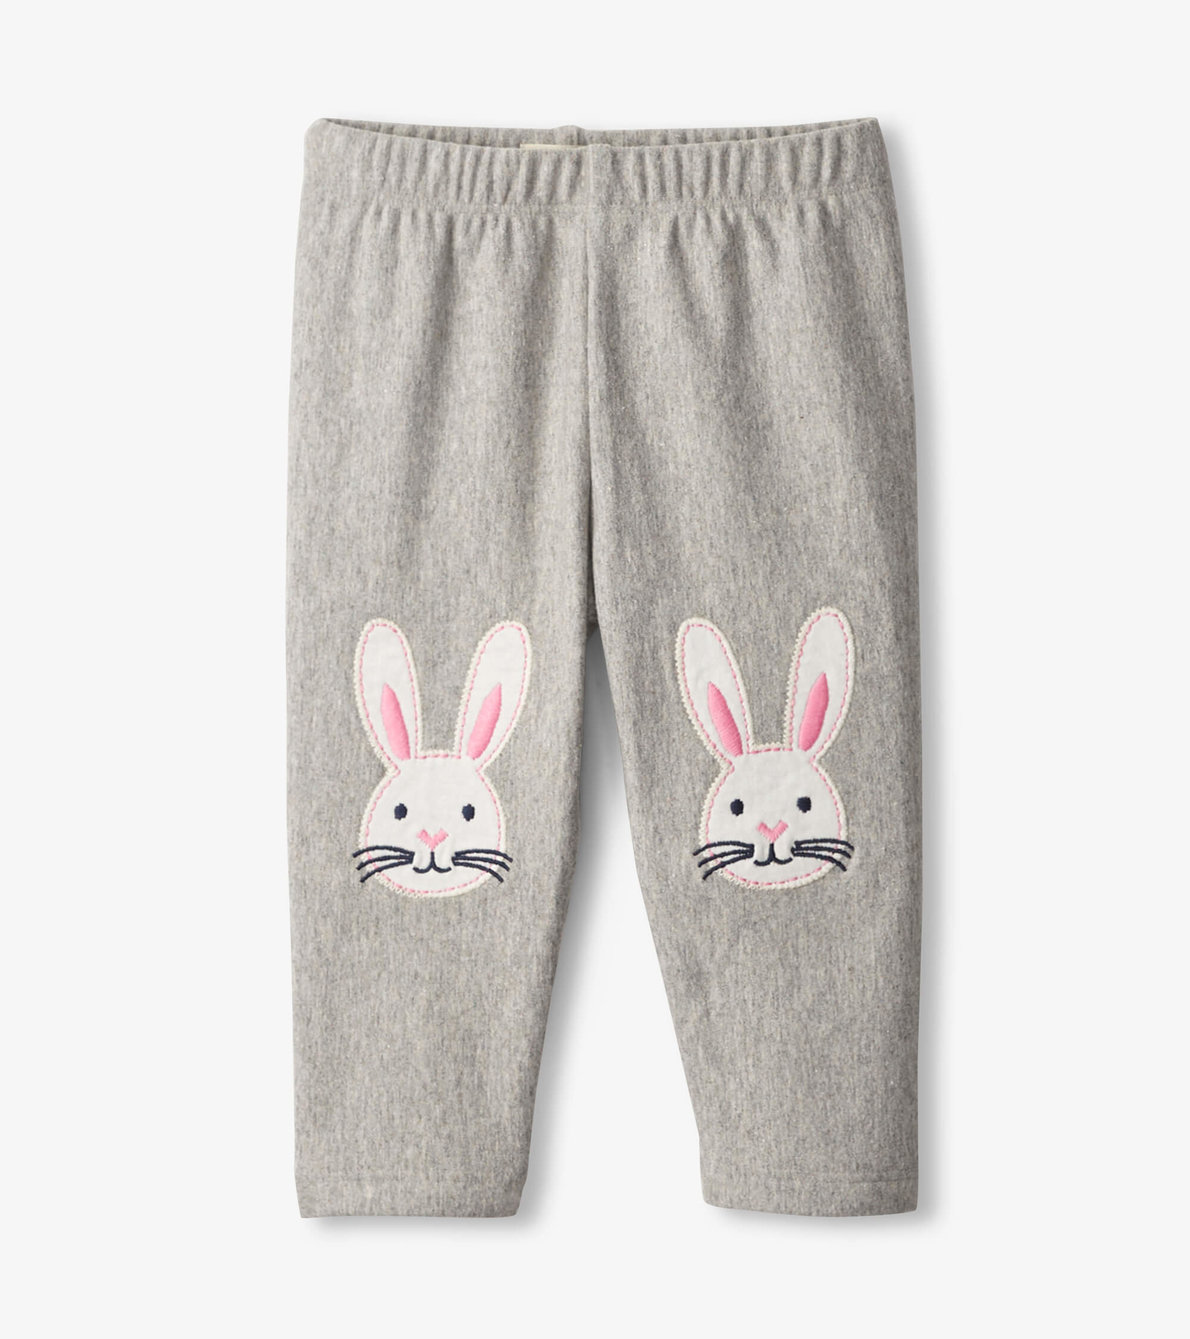 View larger image of Bunnies Cozy Baby Leggings